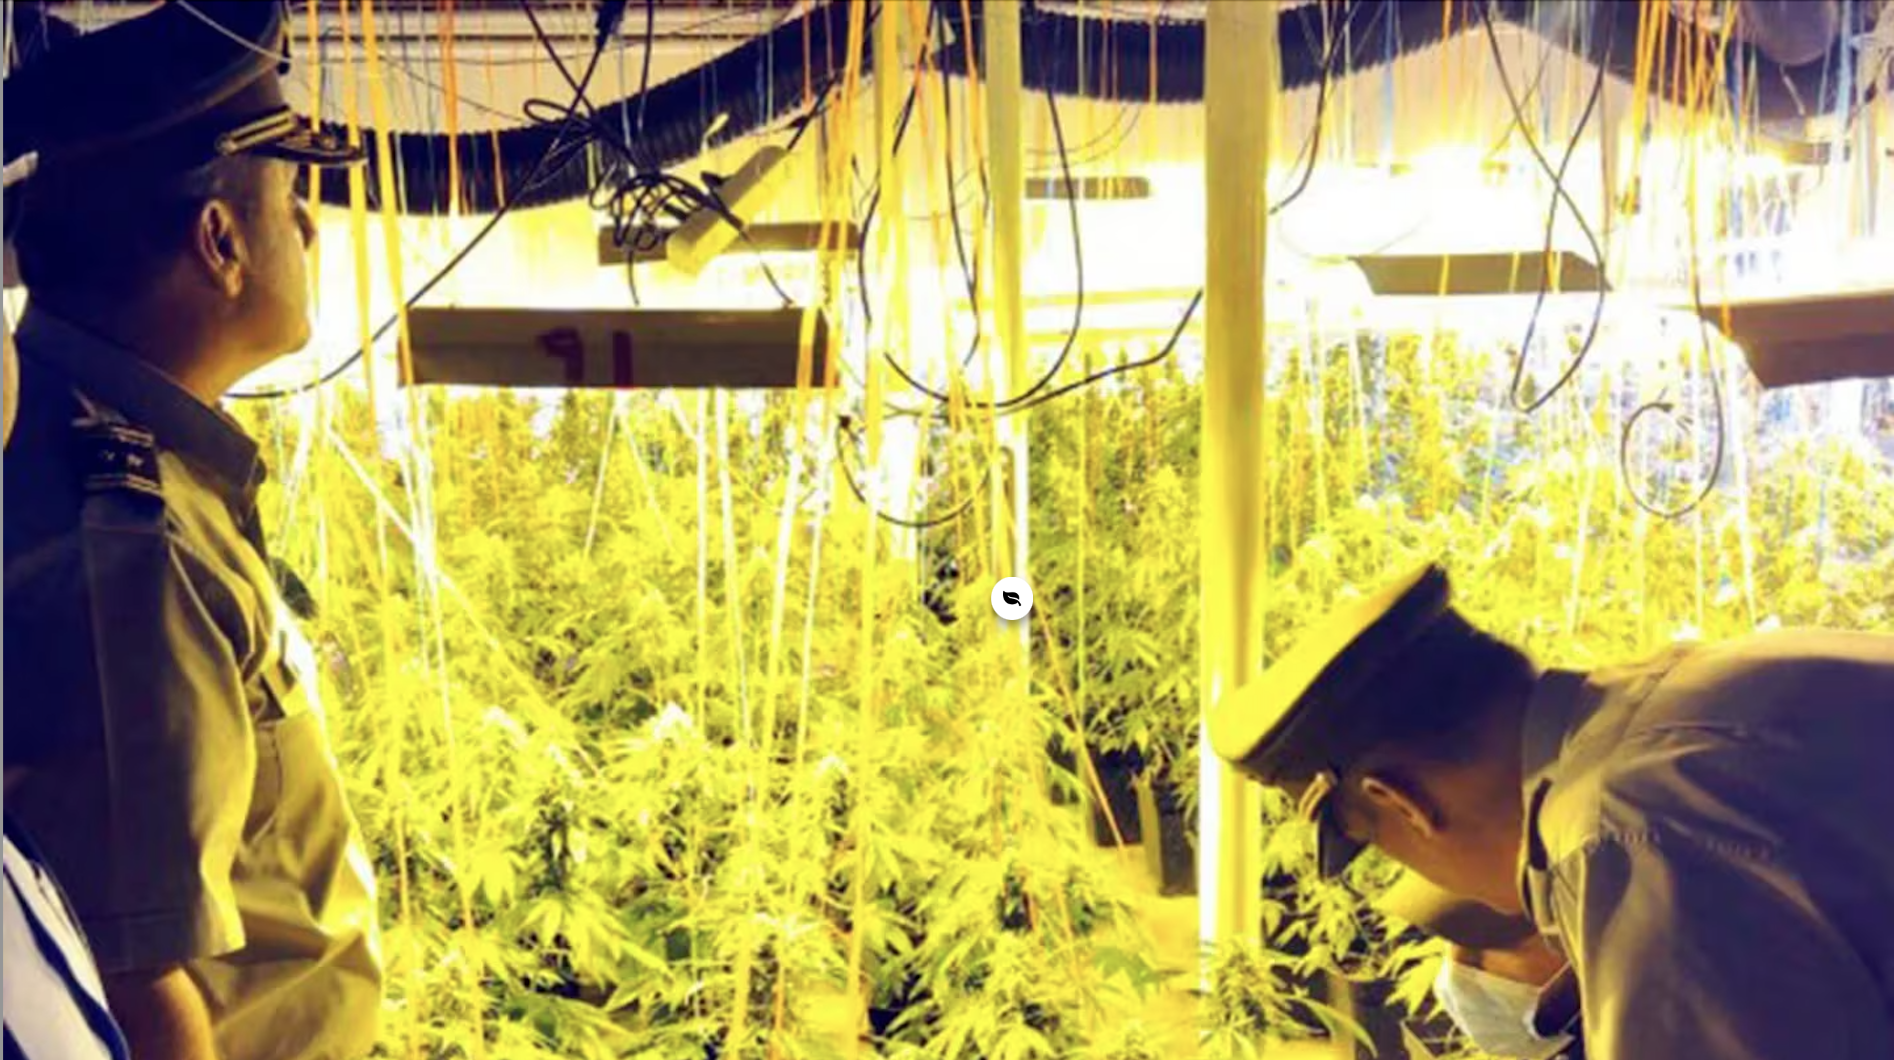 Chinese Mafia Builds Up Their Marijuana Operations in Chile